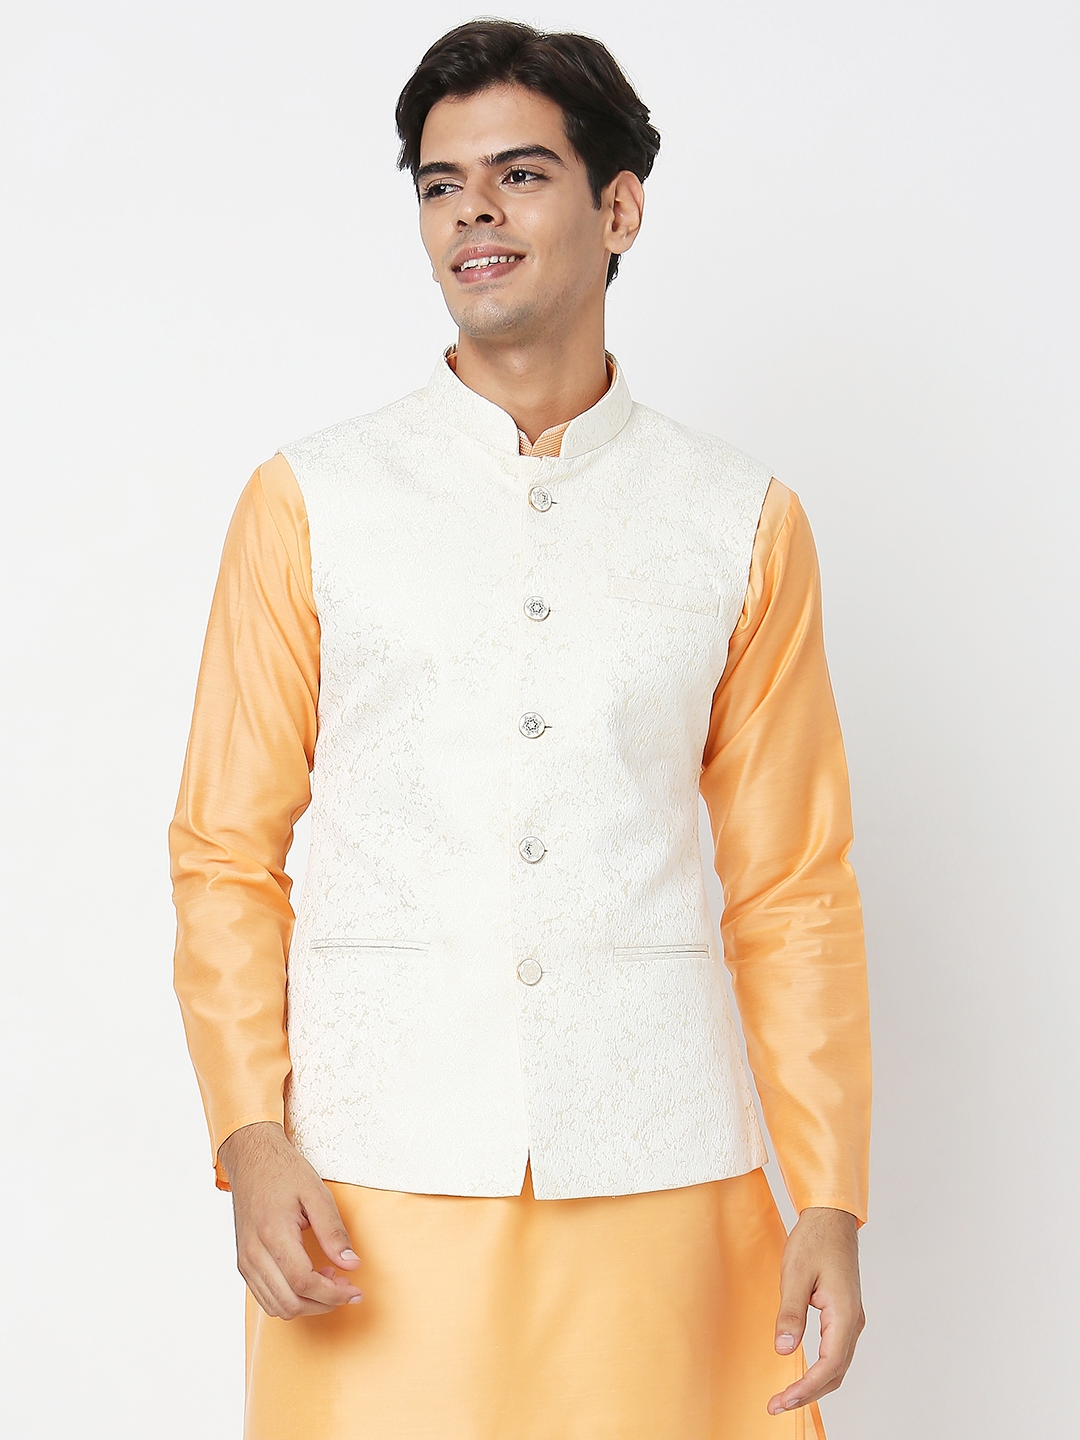 Ethnicity Men's Cream Polyester Solid Jackets | M